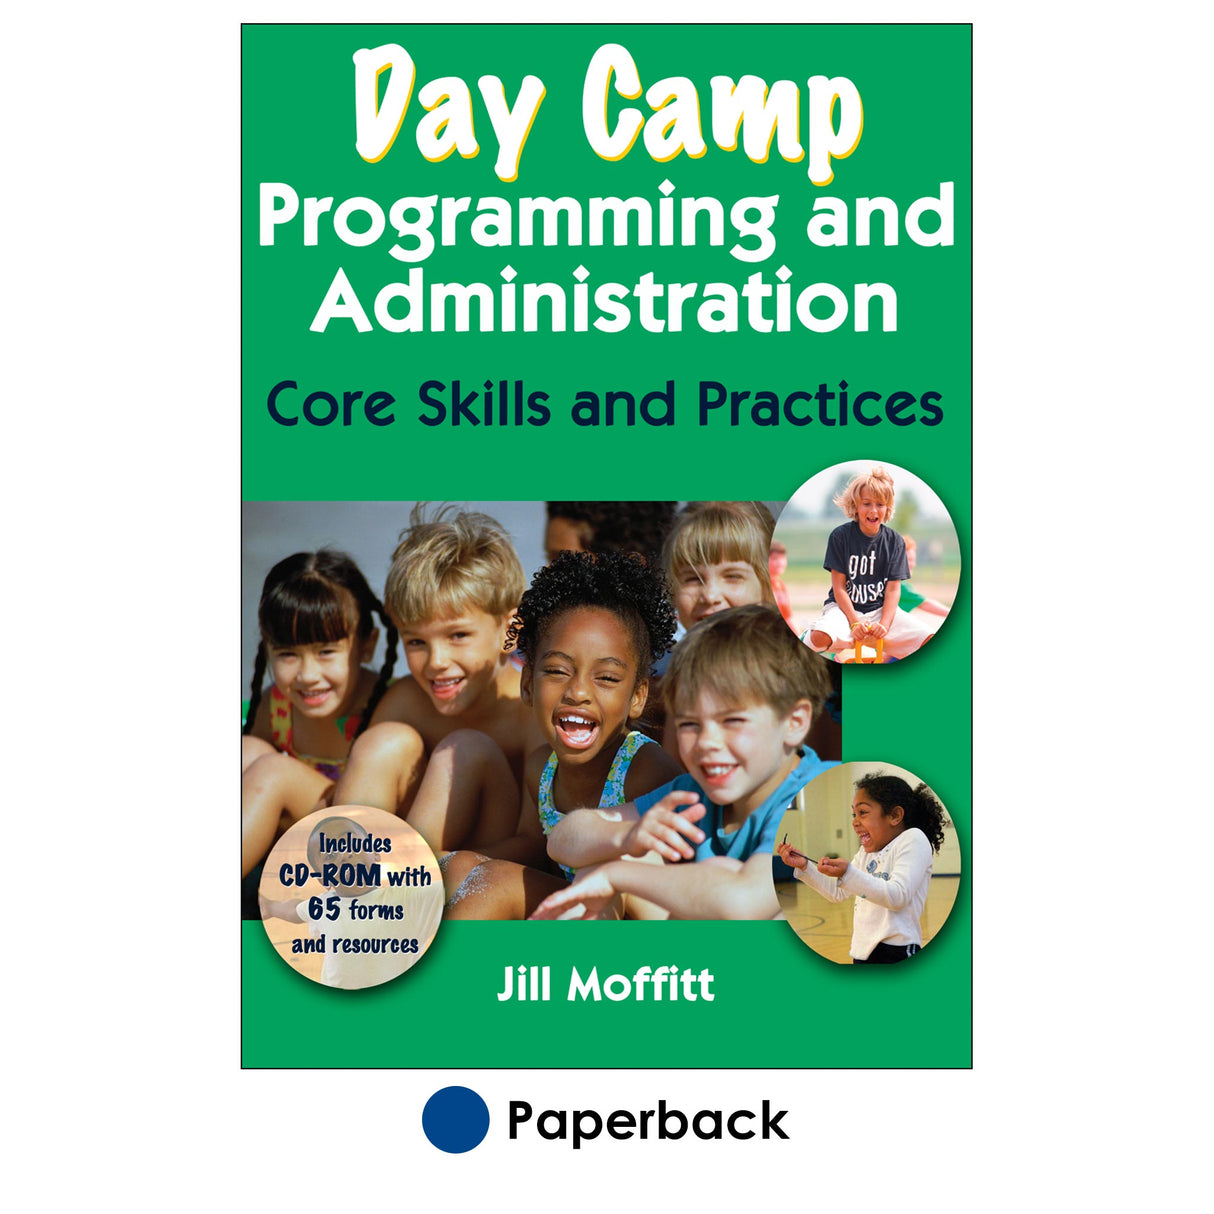 Day Camp Programming and Administration